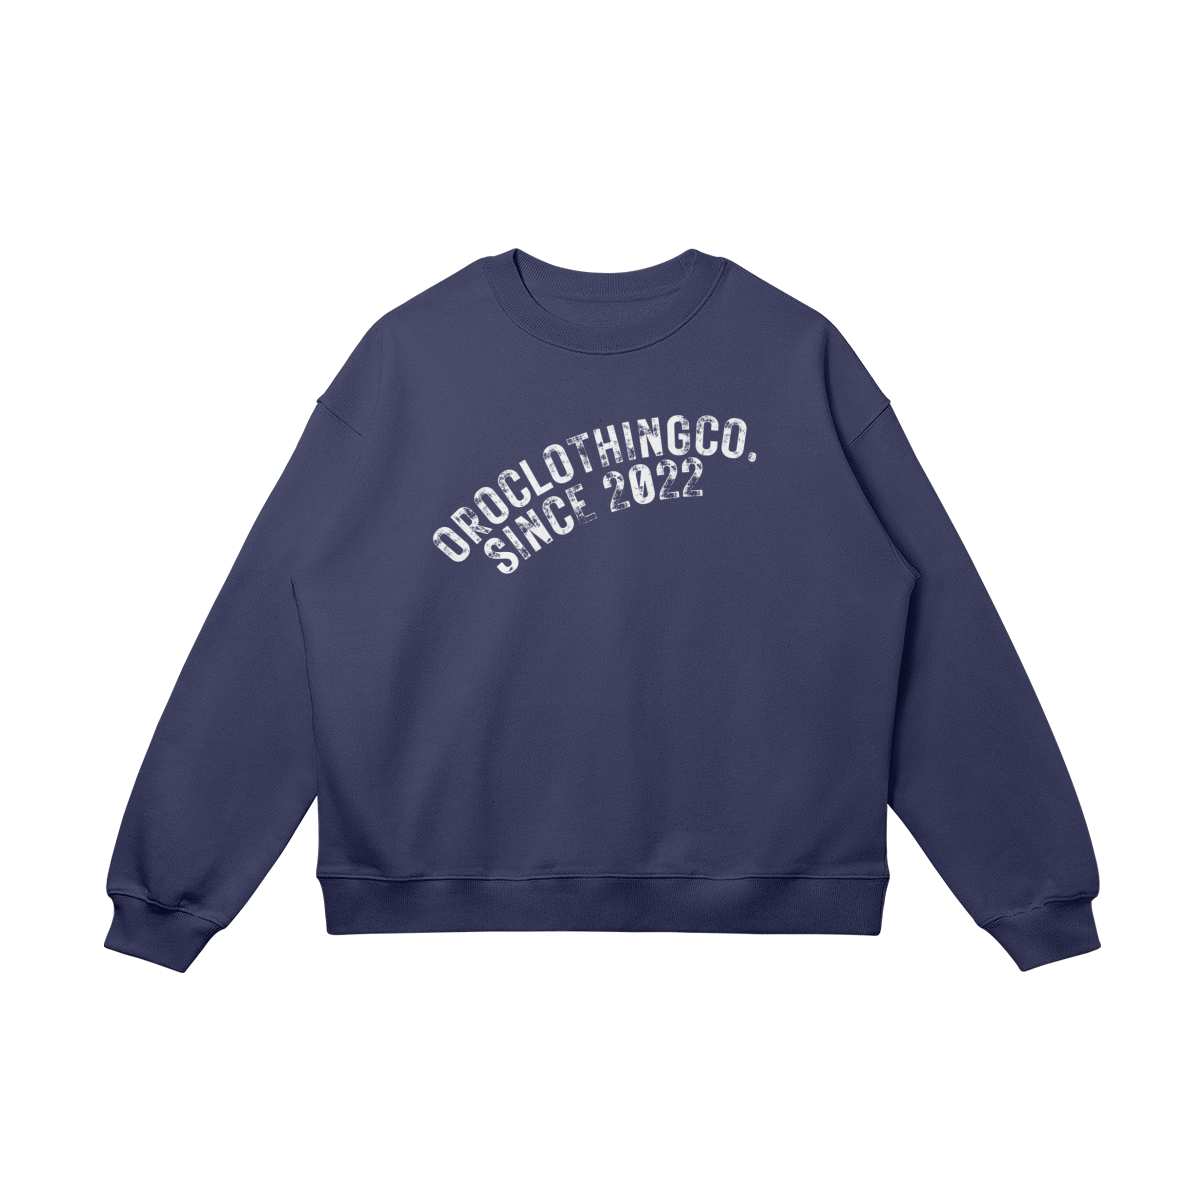 SINCE 22/ NAVY SWEATER